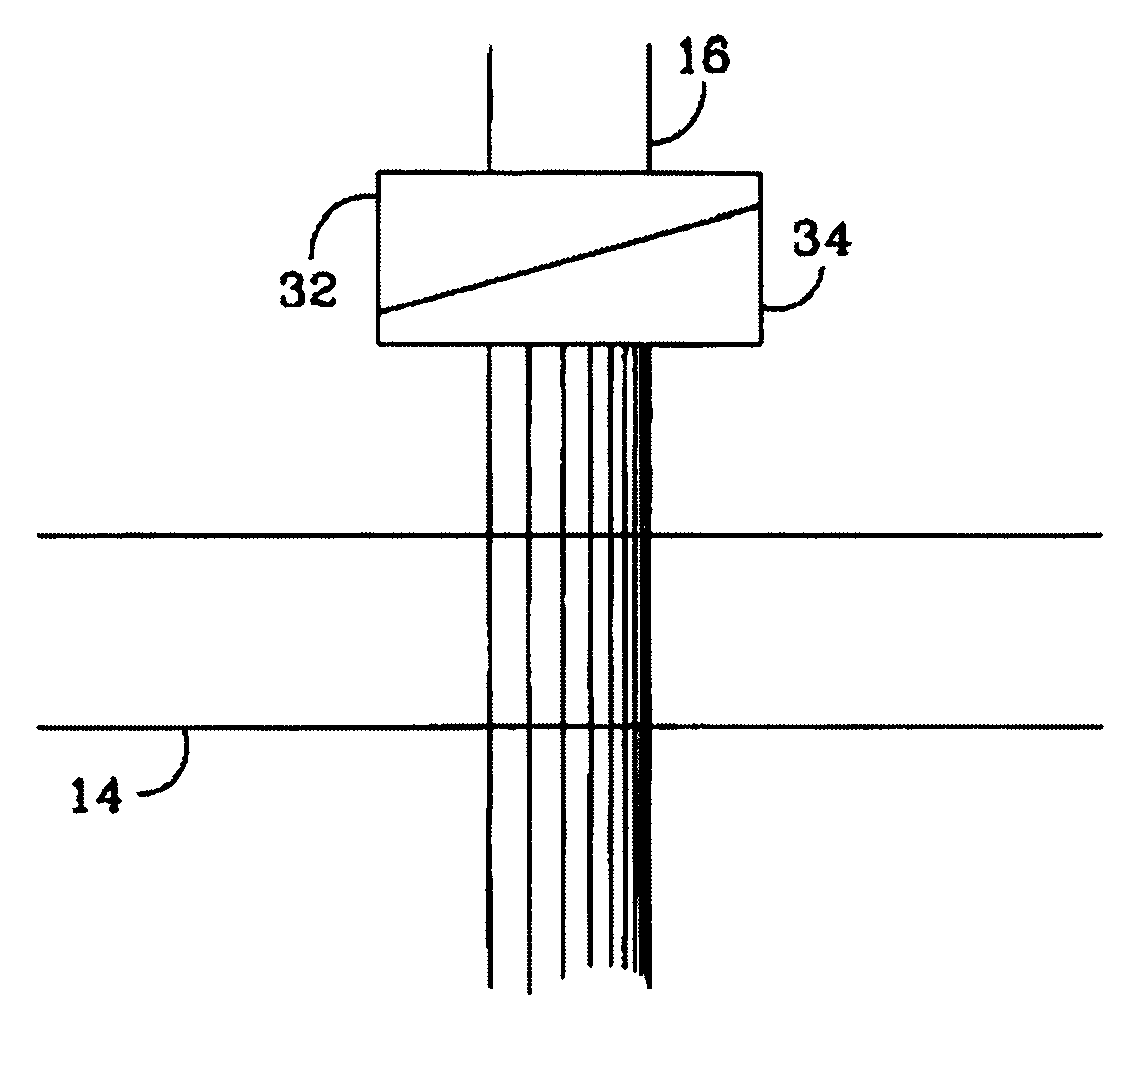 Optical pumping device and method